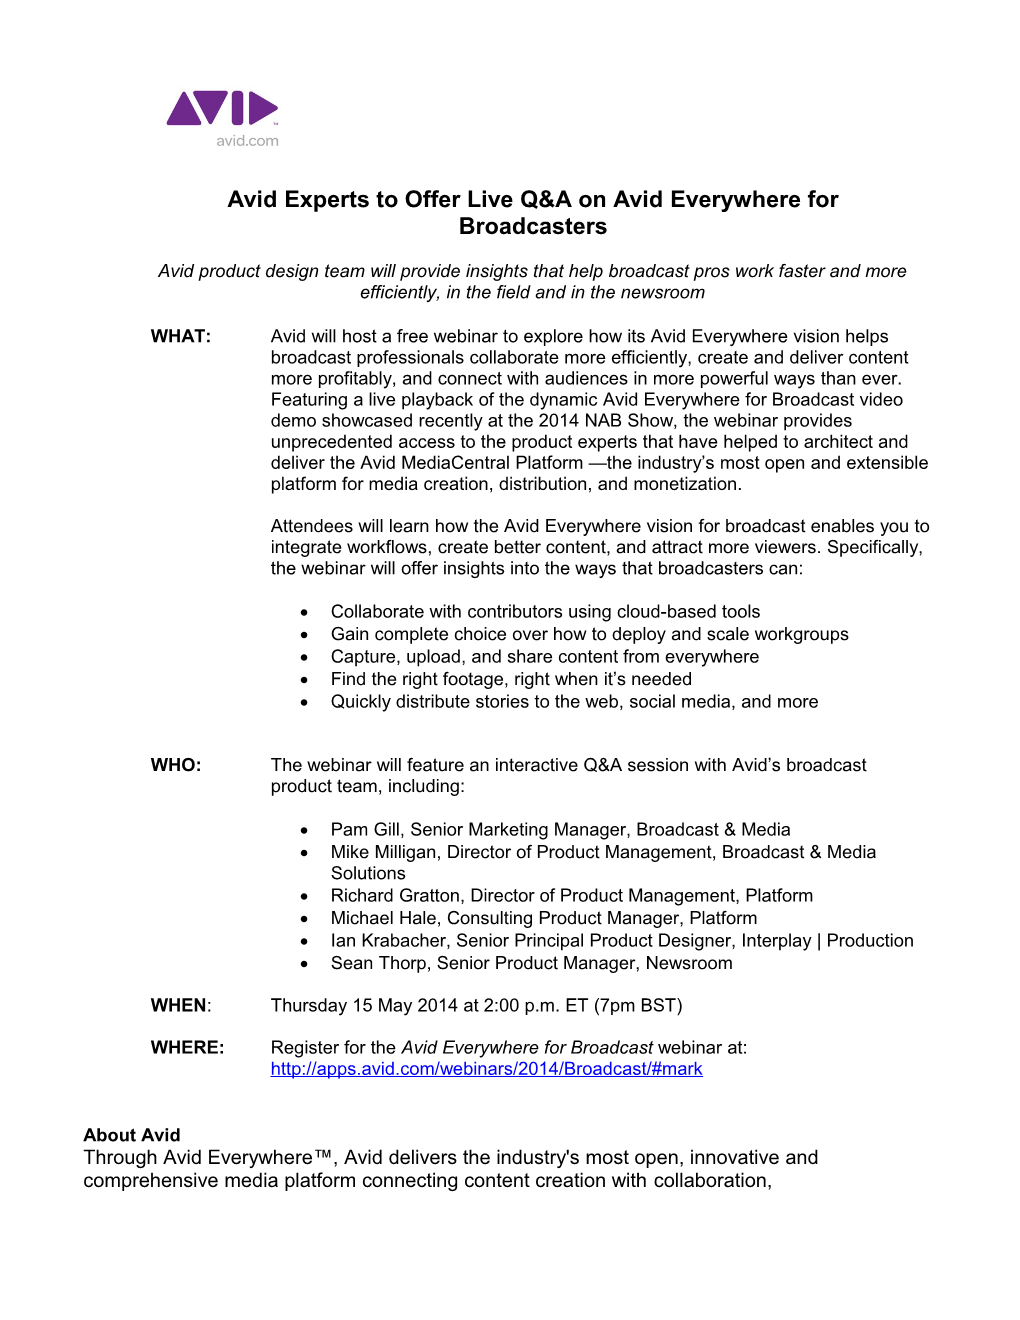 Avid Experts to Offer Live Q&A on Avid Everywhere for Broadcasters